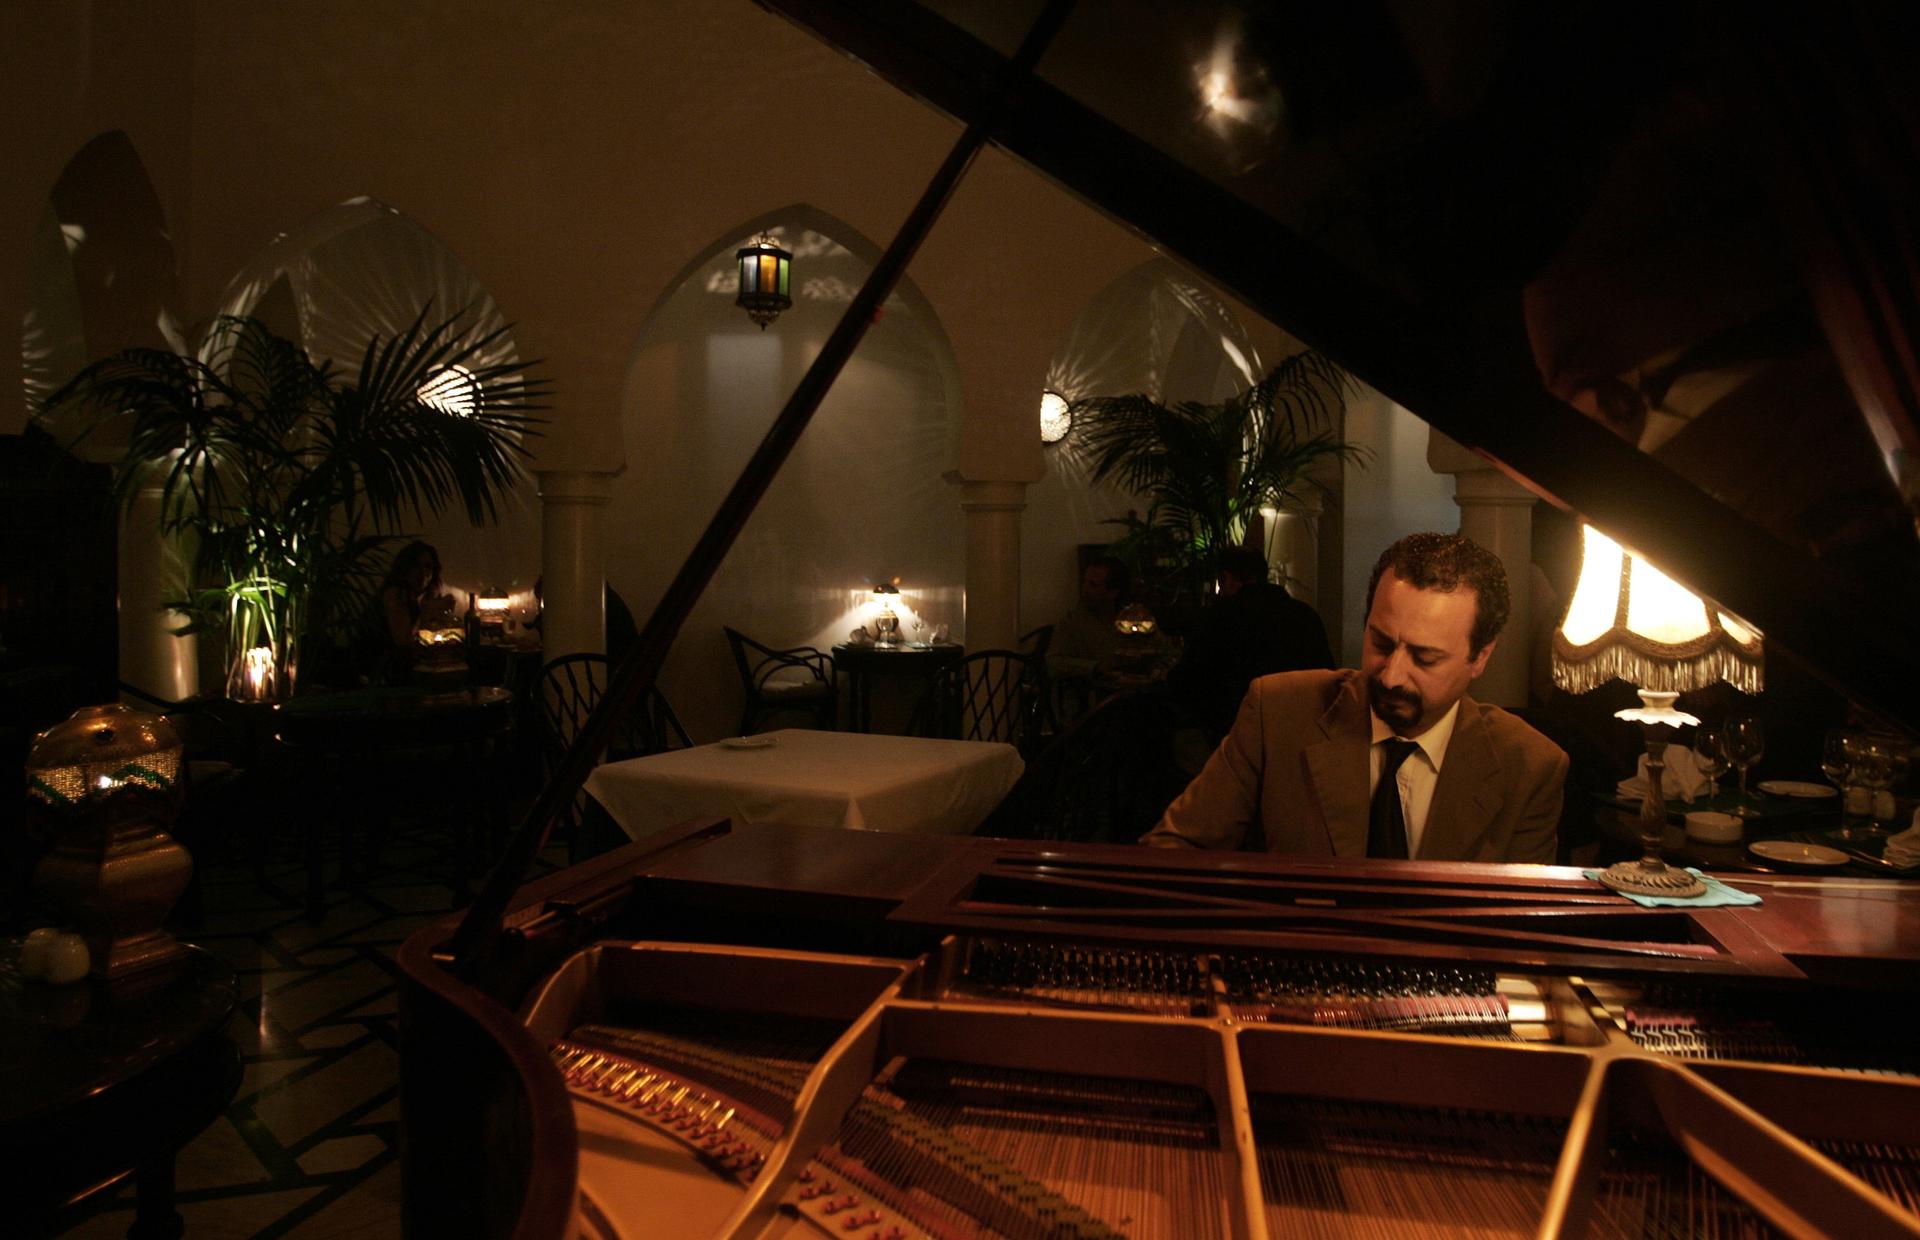 Pianist Issam Chabaa plays at Rick's Cafe in Casablanca